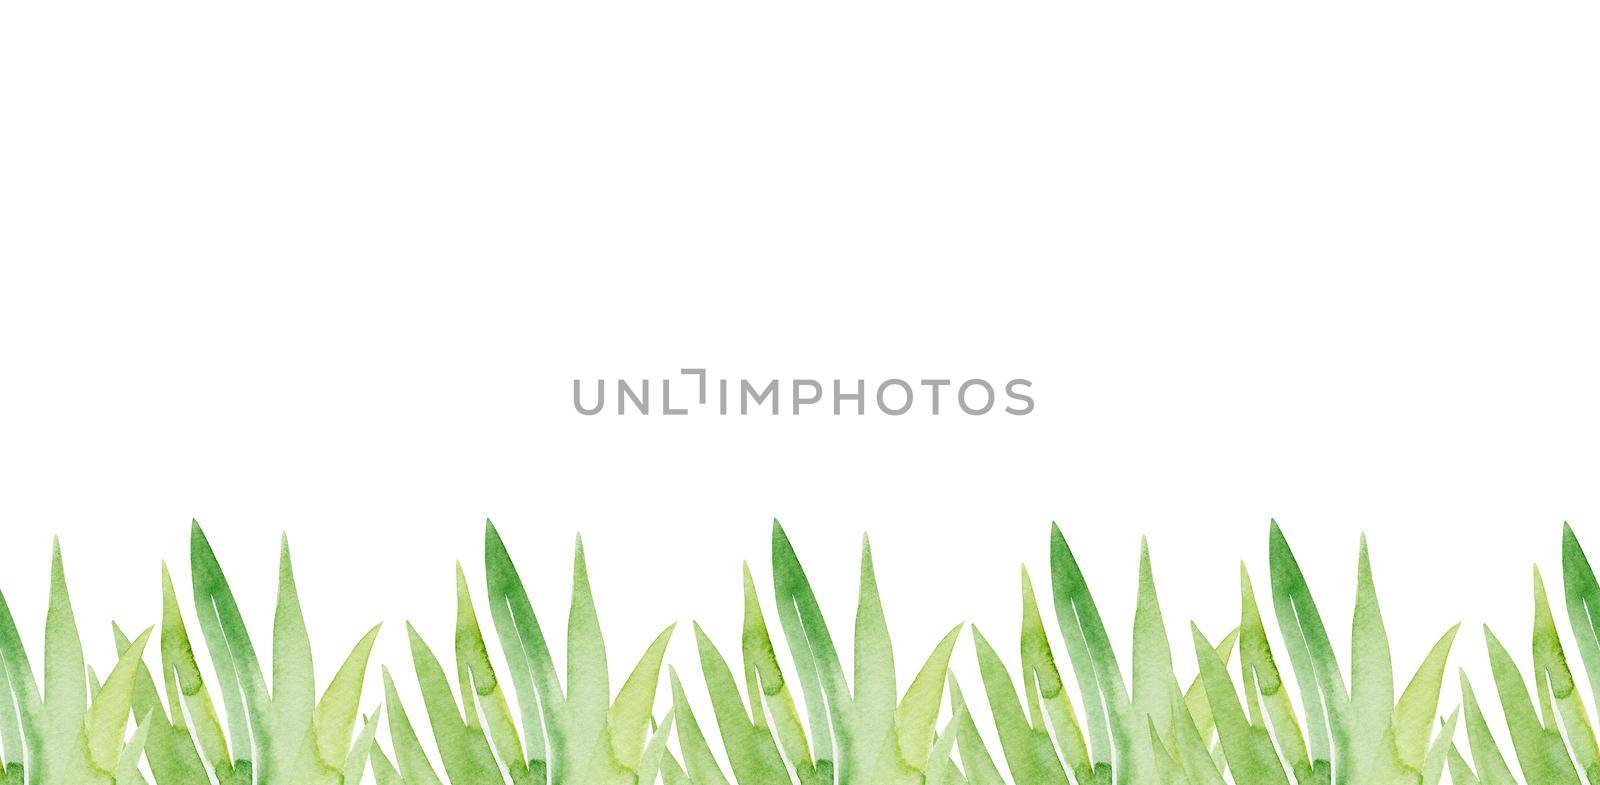 Watercolor green grass seamless border on white by dreamloud